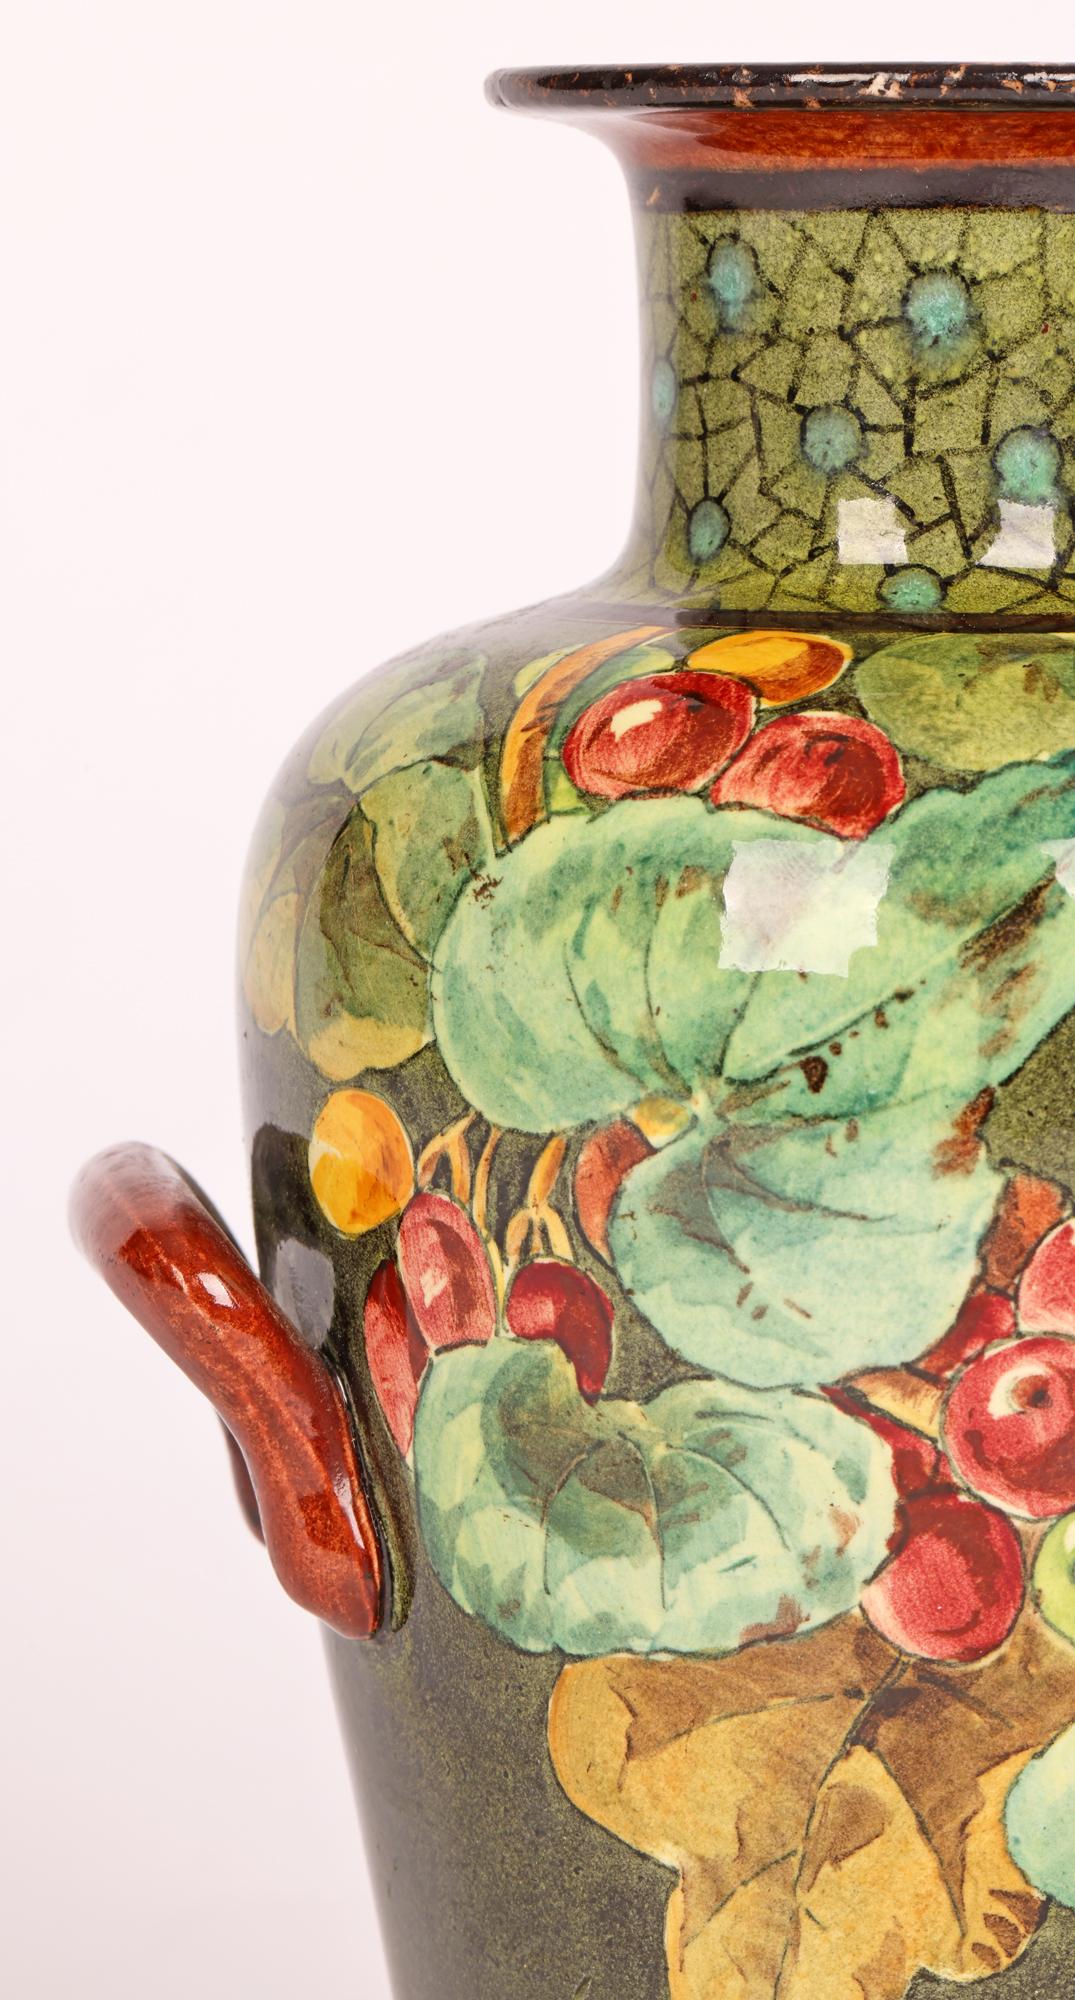 A very stylish Doulton Lambeth Faience Aesthetic Movement twin handled art pottery vase hand painted with floral designs by renowned artist Mary M Arding and dating from around 1884. The vase of tall bulbous shape with a tapered round body narrowing